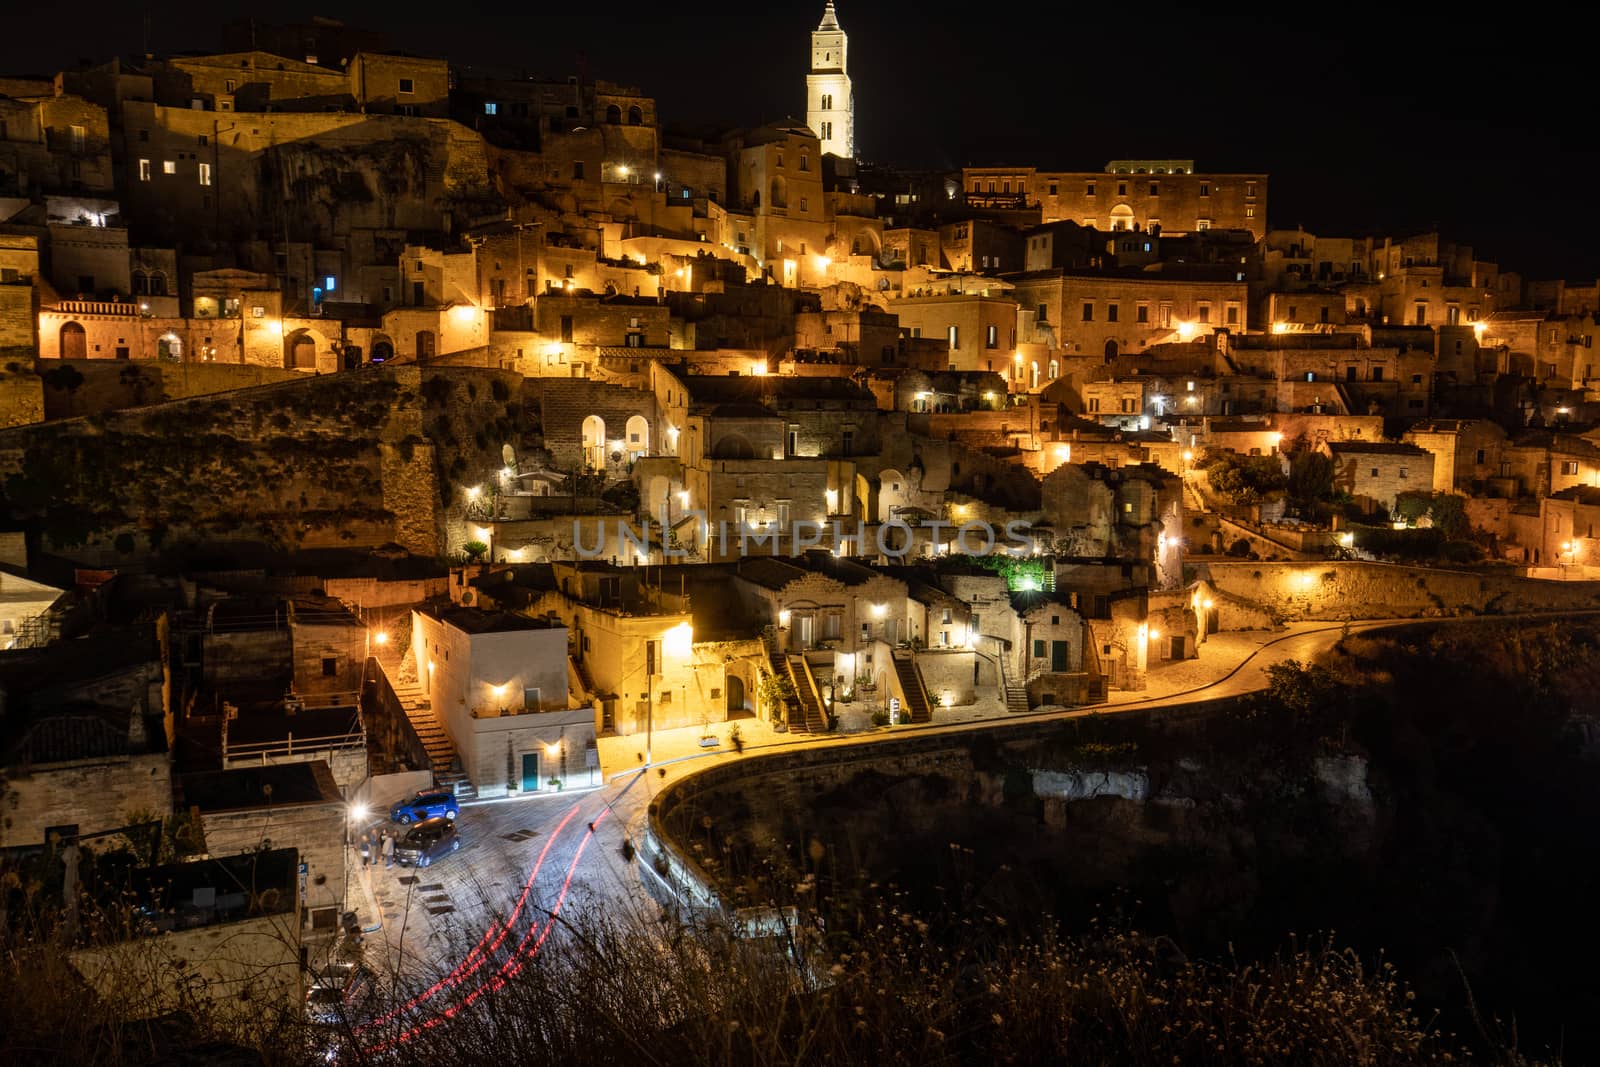 Amazing lighted buildings in ancient Sassi district by night in Matera, Basilicata. Italy by wjarek